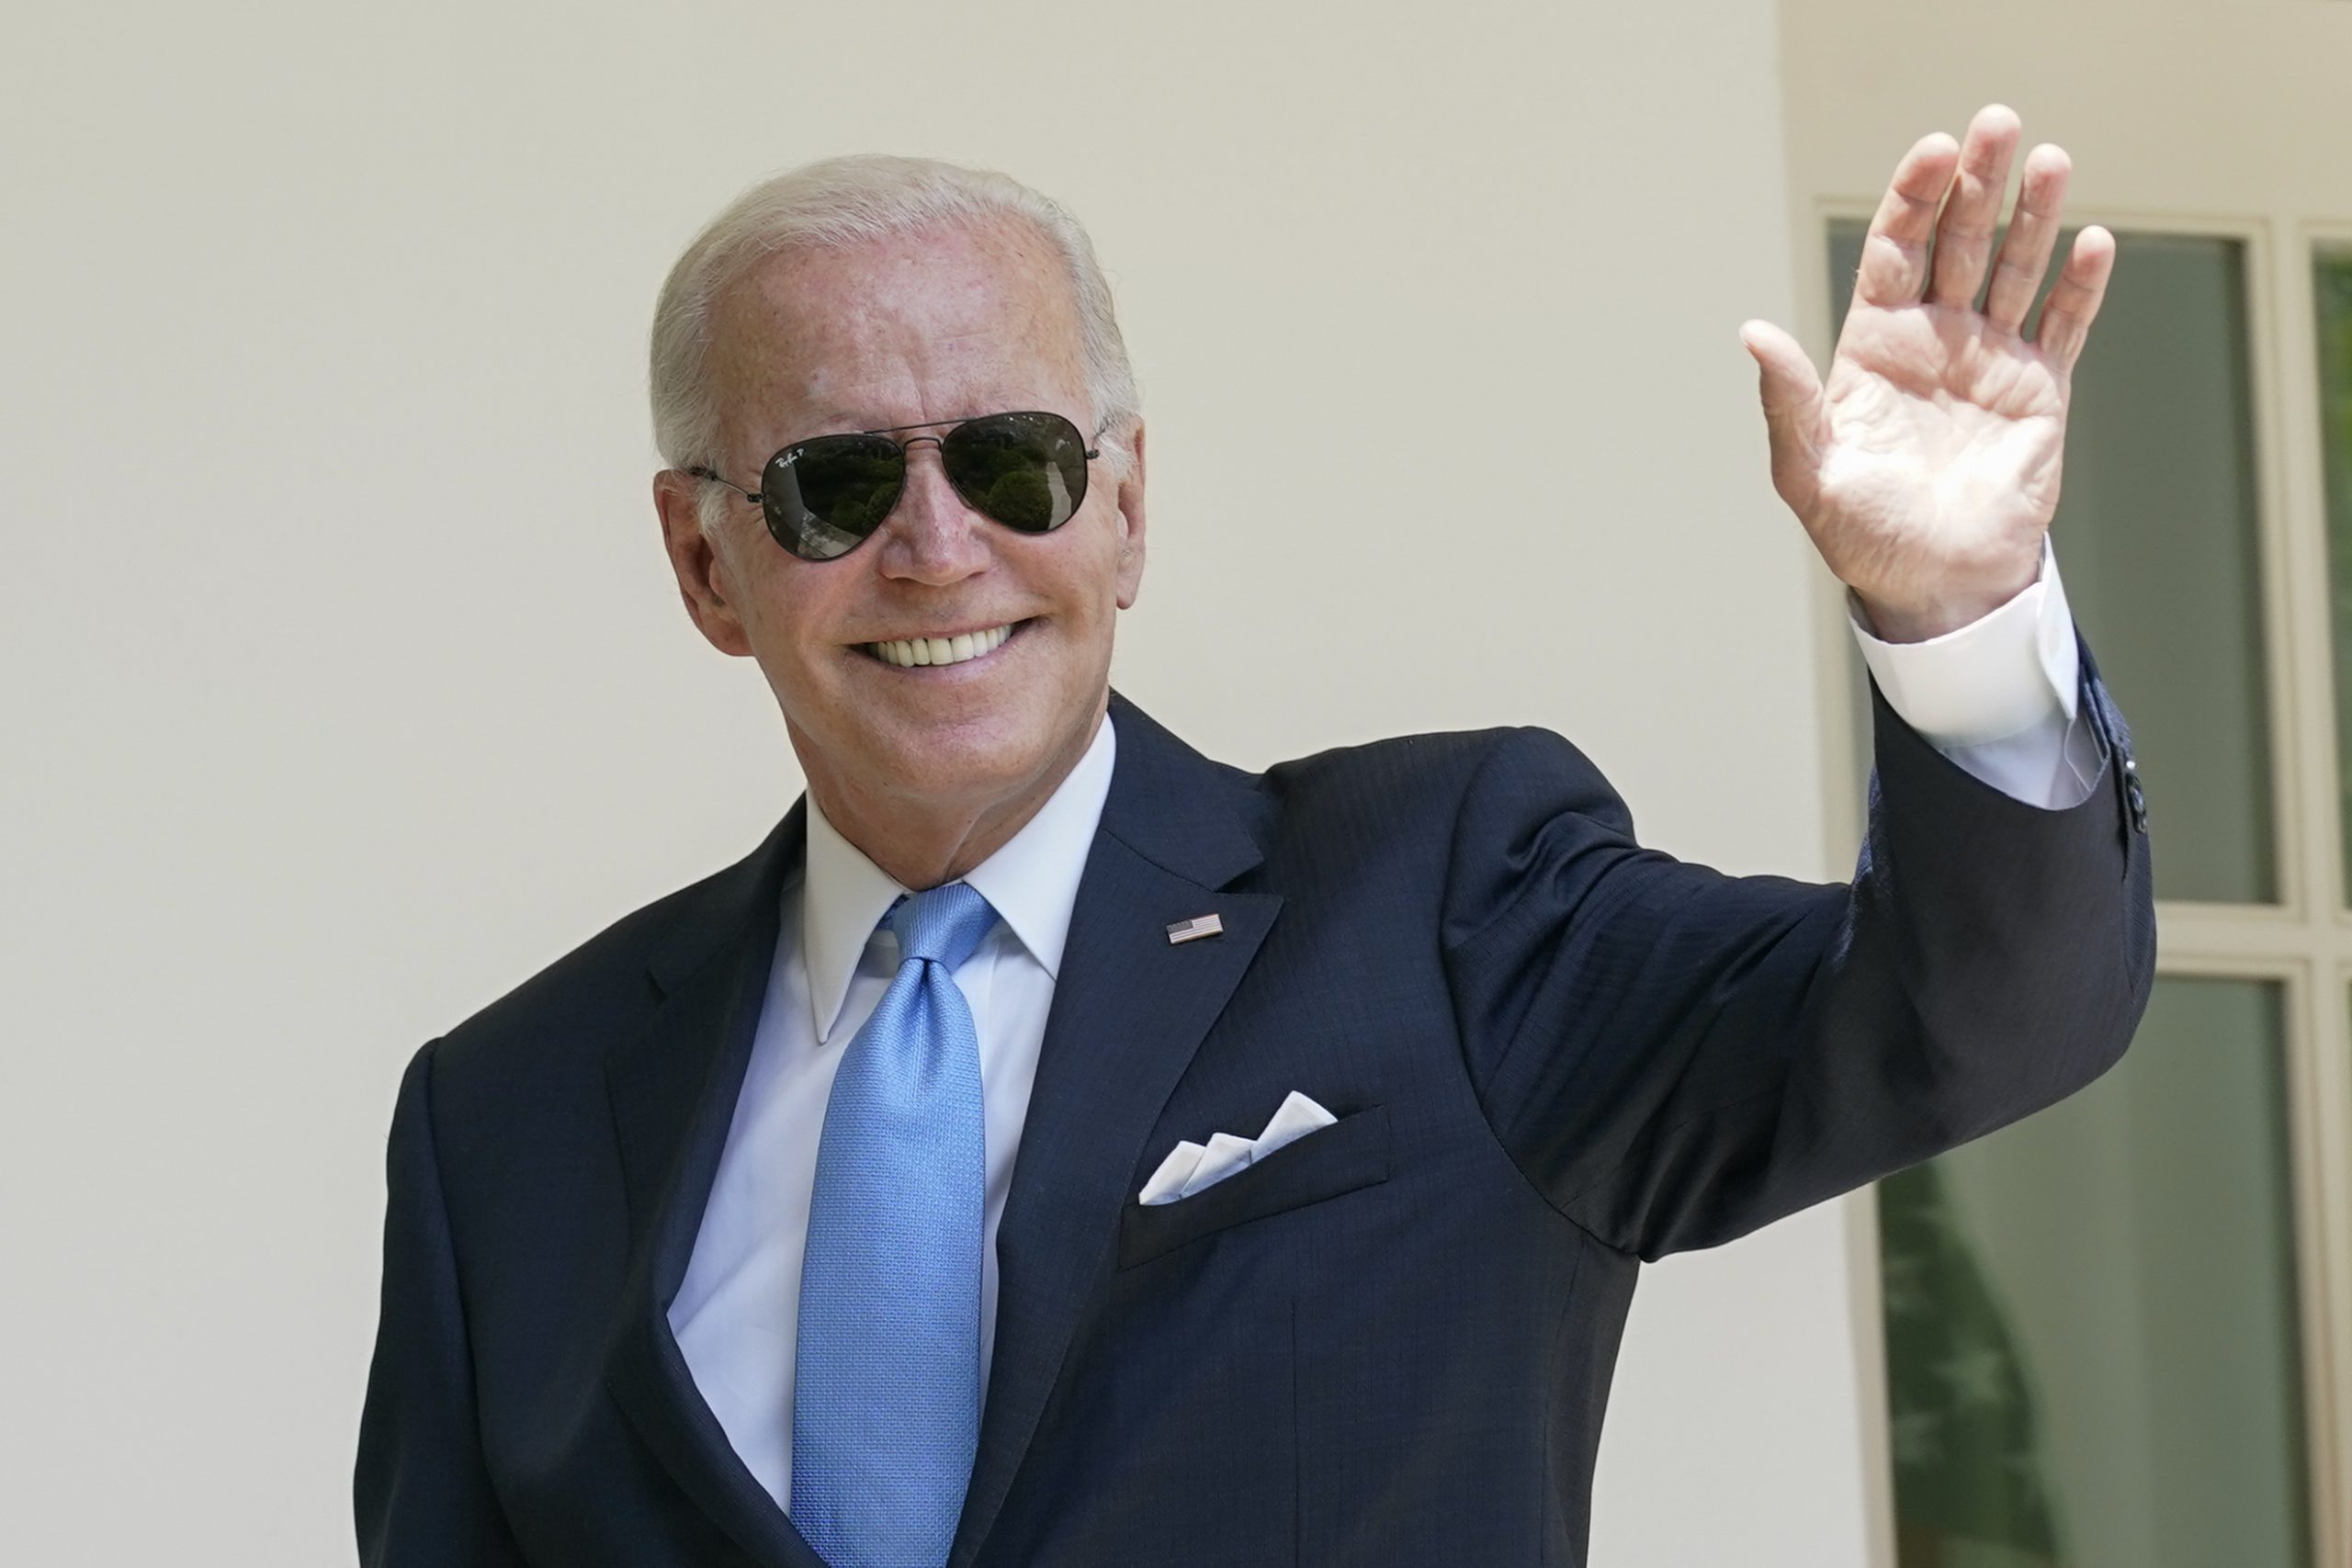 Biden enters the Always Be Closing phase of his first term